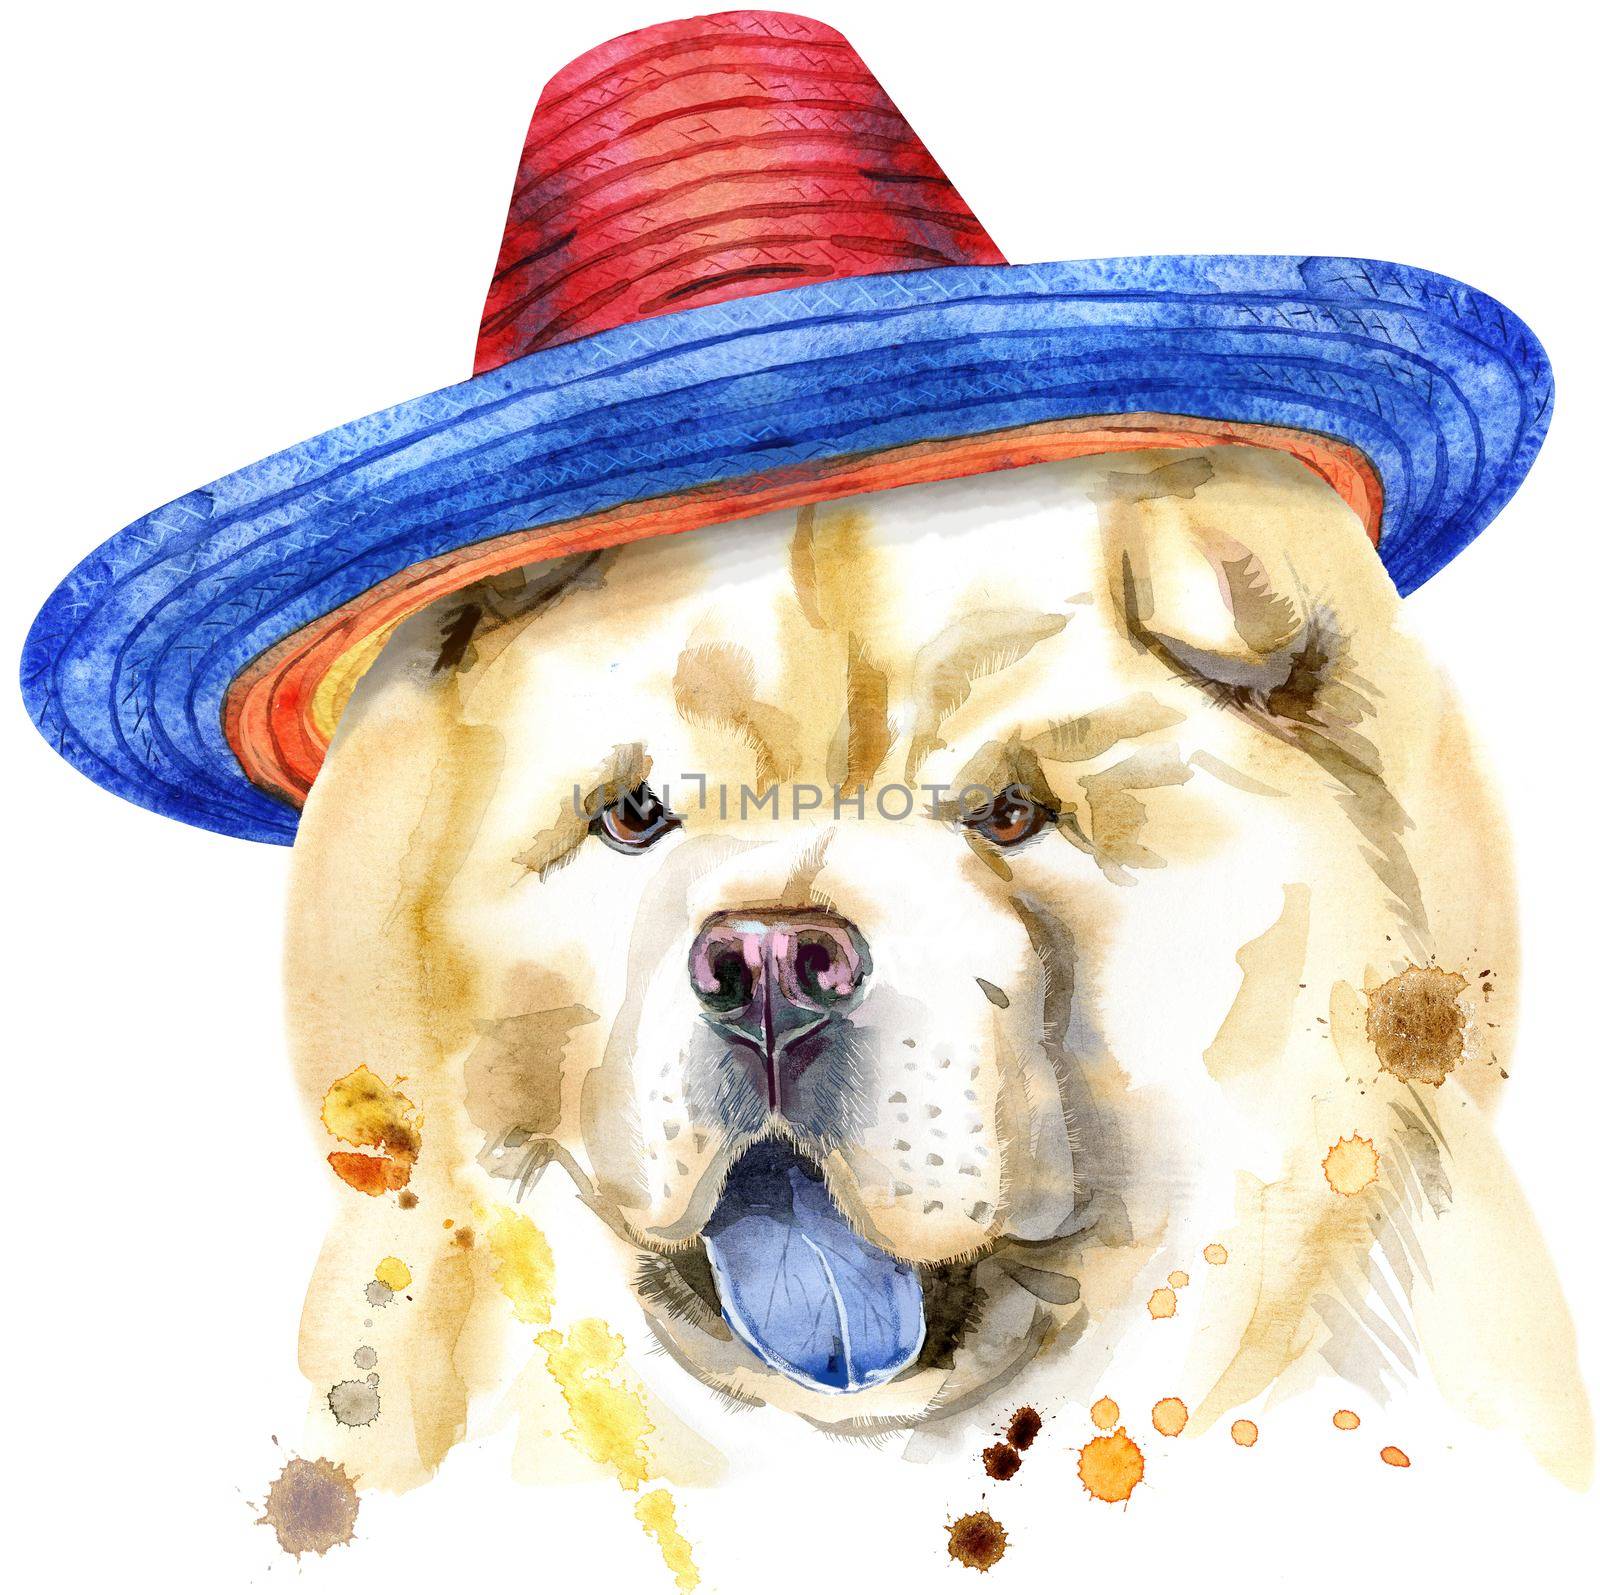 Cute Dog in mexican hat. Dog T-shirt graphics. watercolor chow-chow dog illustration